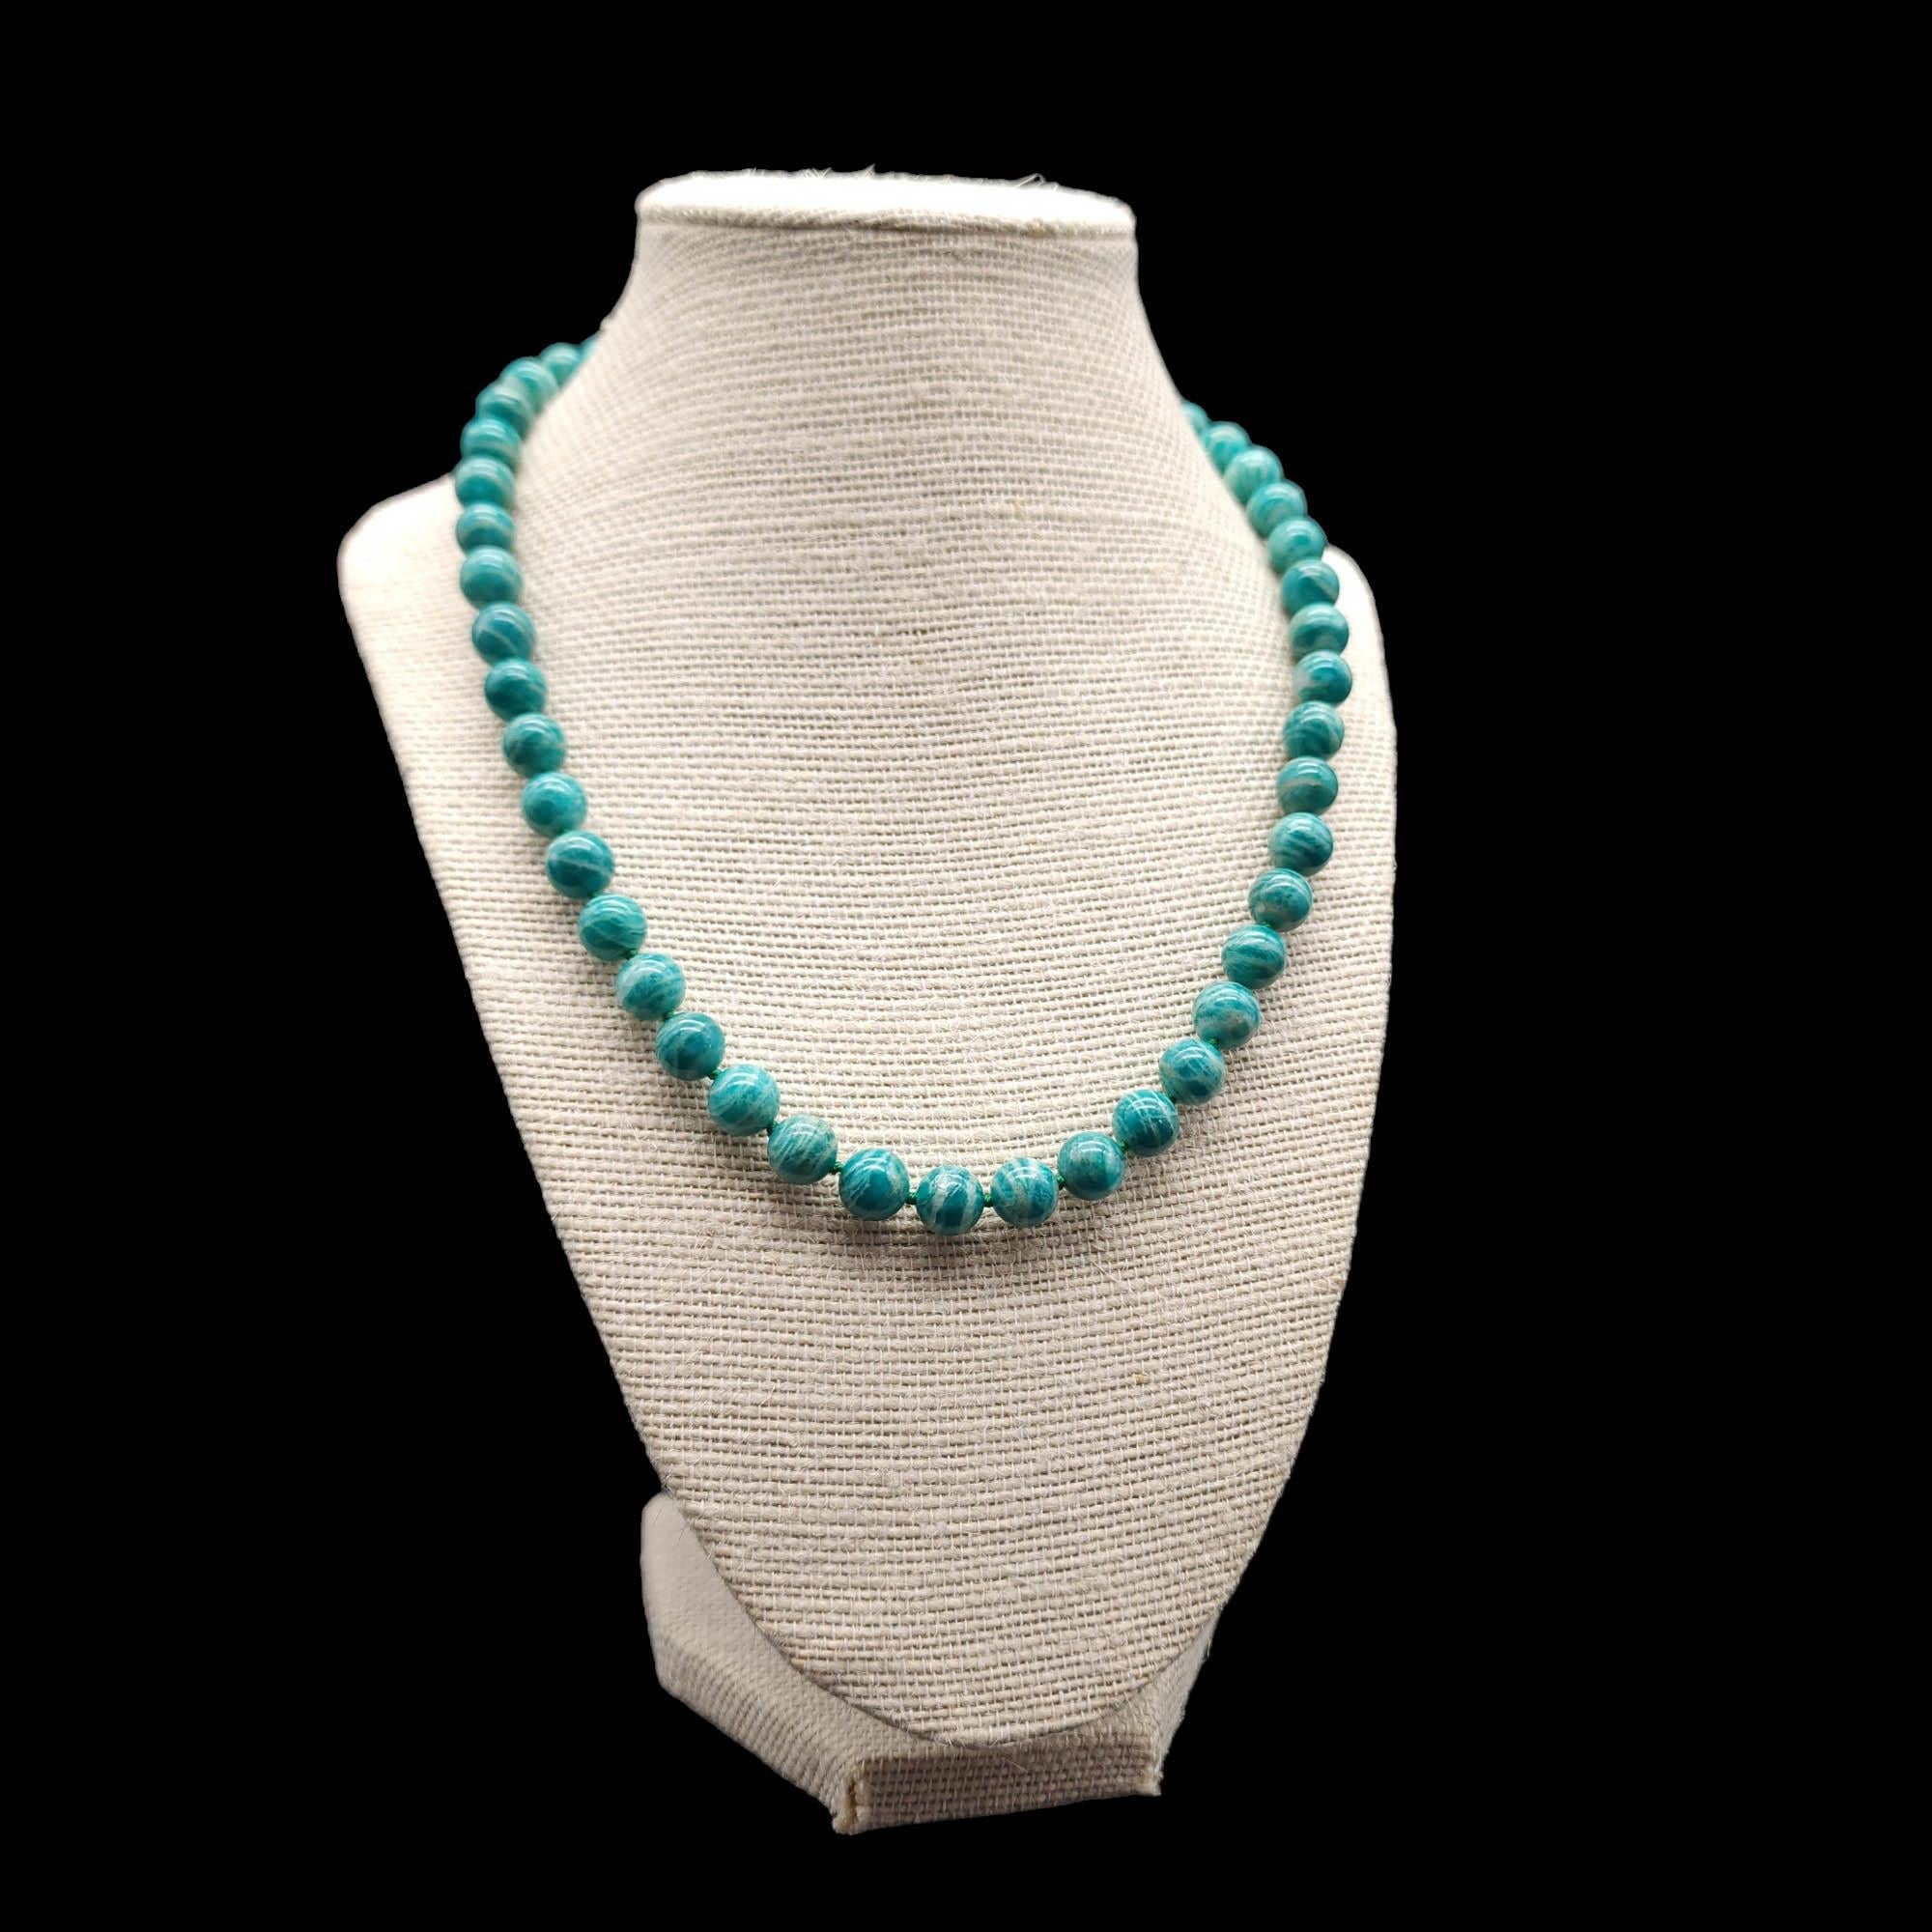 Necklace length: 48 cm / 18.75 inches
Each bead approx 1 cm
Marks / Hallmarks: 925 on clasp

Discover the timeless elegance of this vintage amazonite bead necklace, meticulously hand-knotted for enduring quality. Each bead is a piece of history,